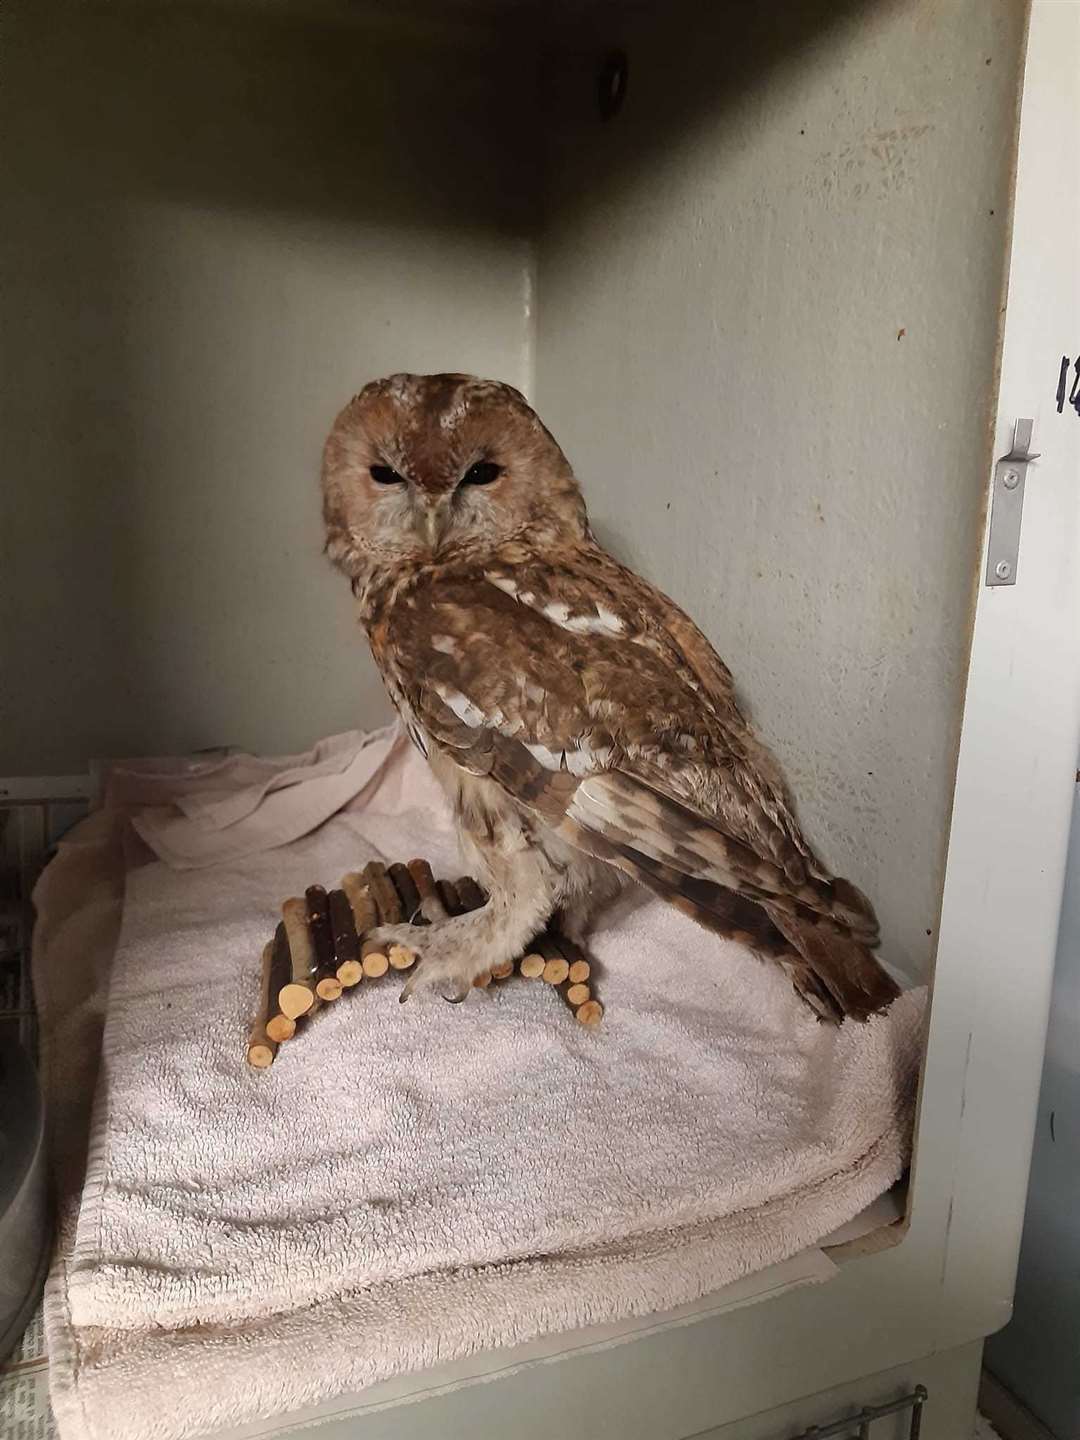 Scottish SPCA rescues owl from wood burning stove in Aberdeen